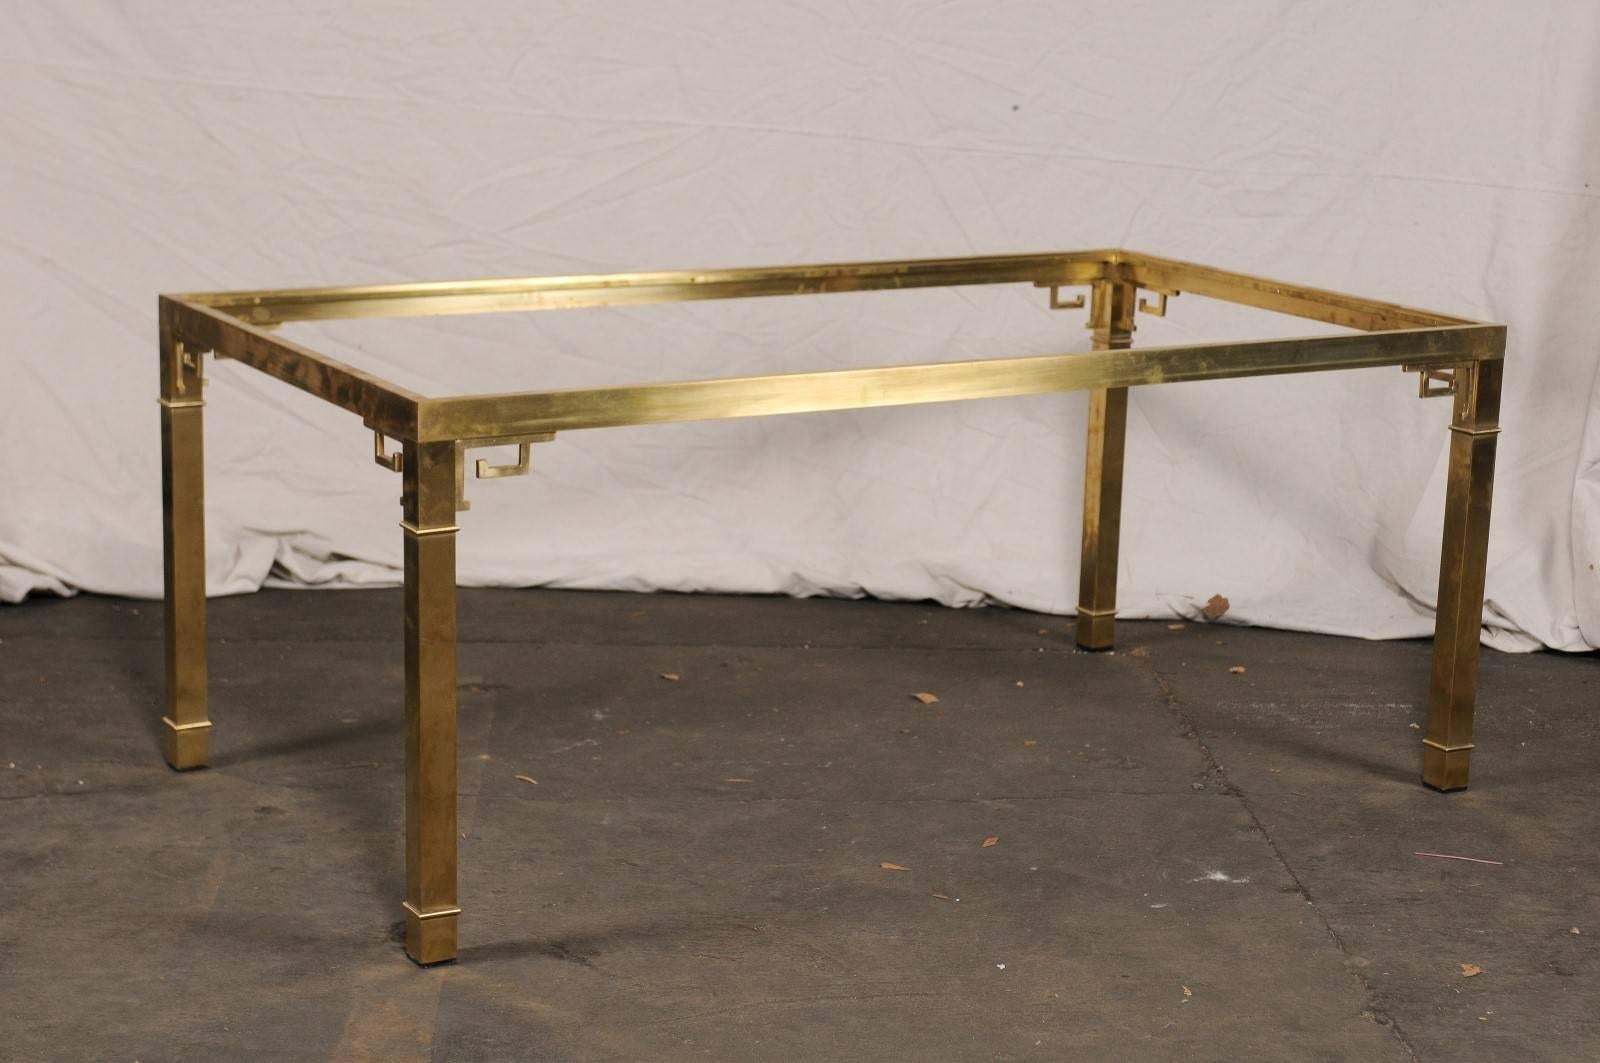 Italian brass dining table in the style of Mastercraft, Greek key motif, Classic modern timeless, does not include glass, circa 1970s.